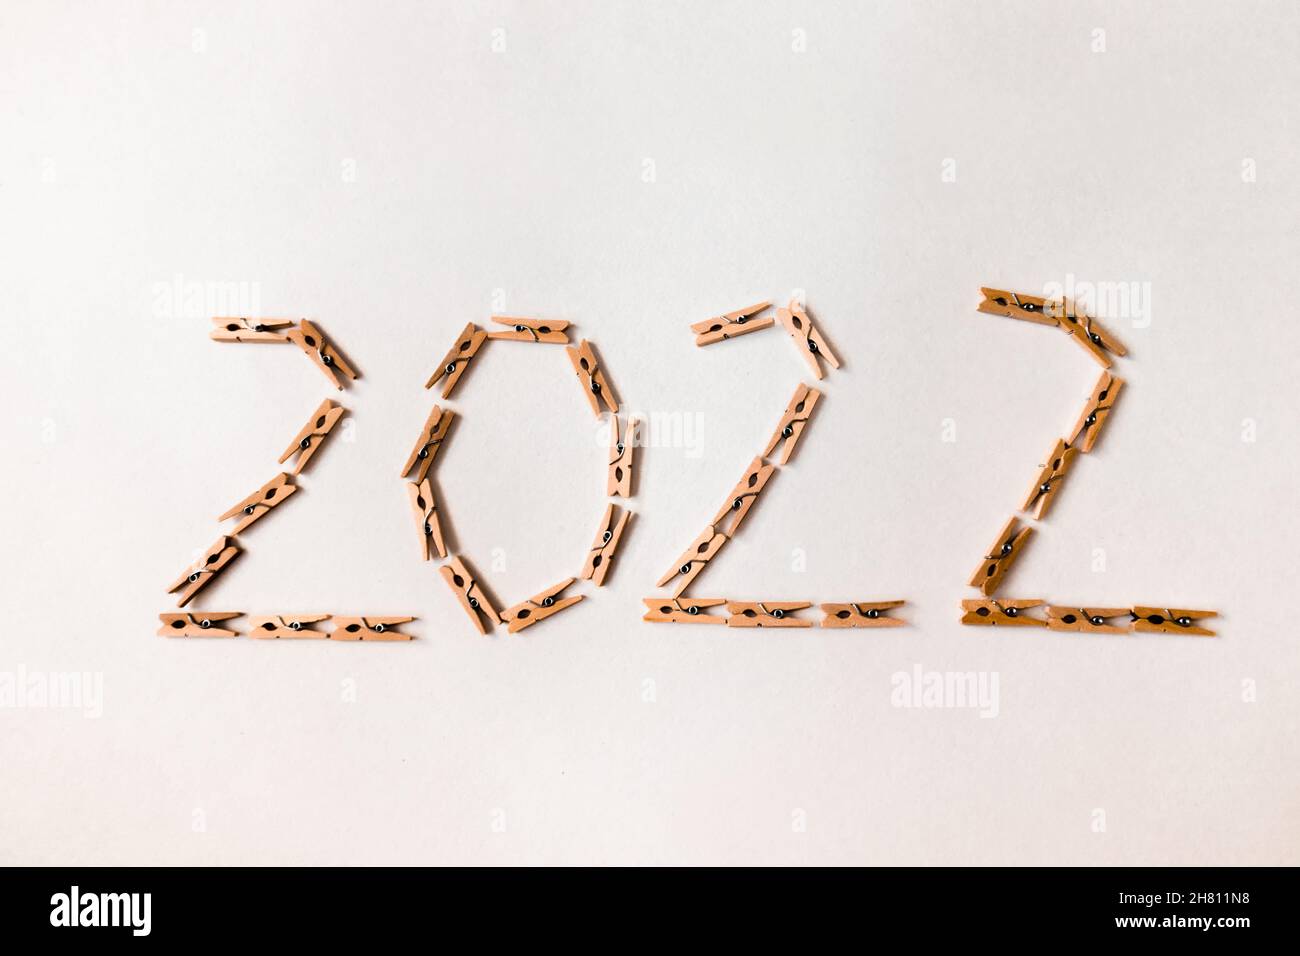 Number 2022 is made of small clothespins on a white background. Stock Photo